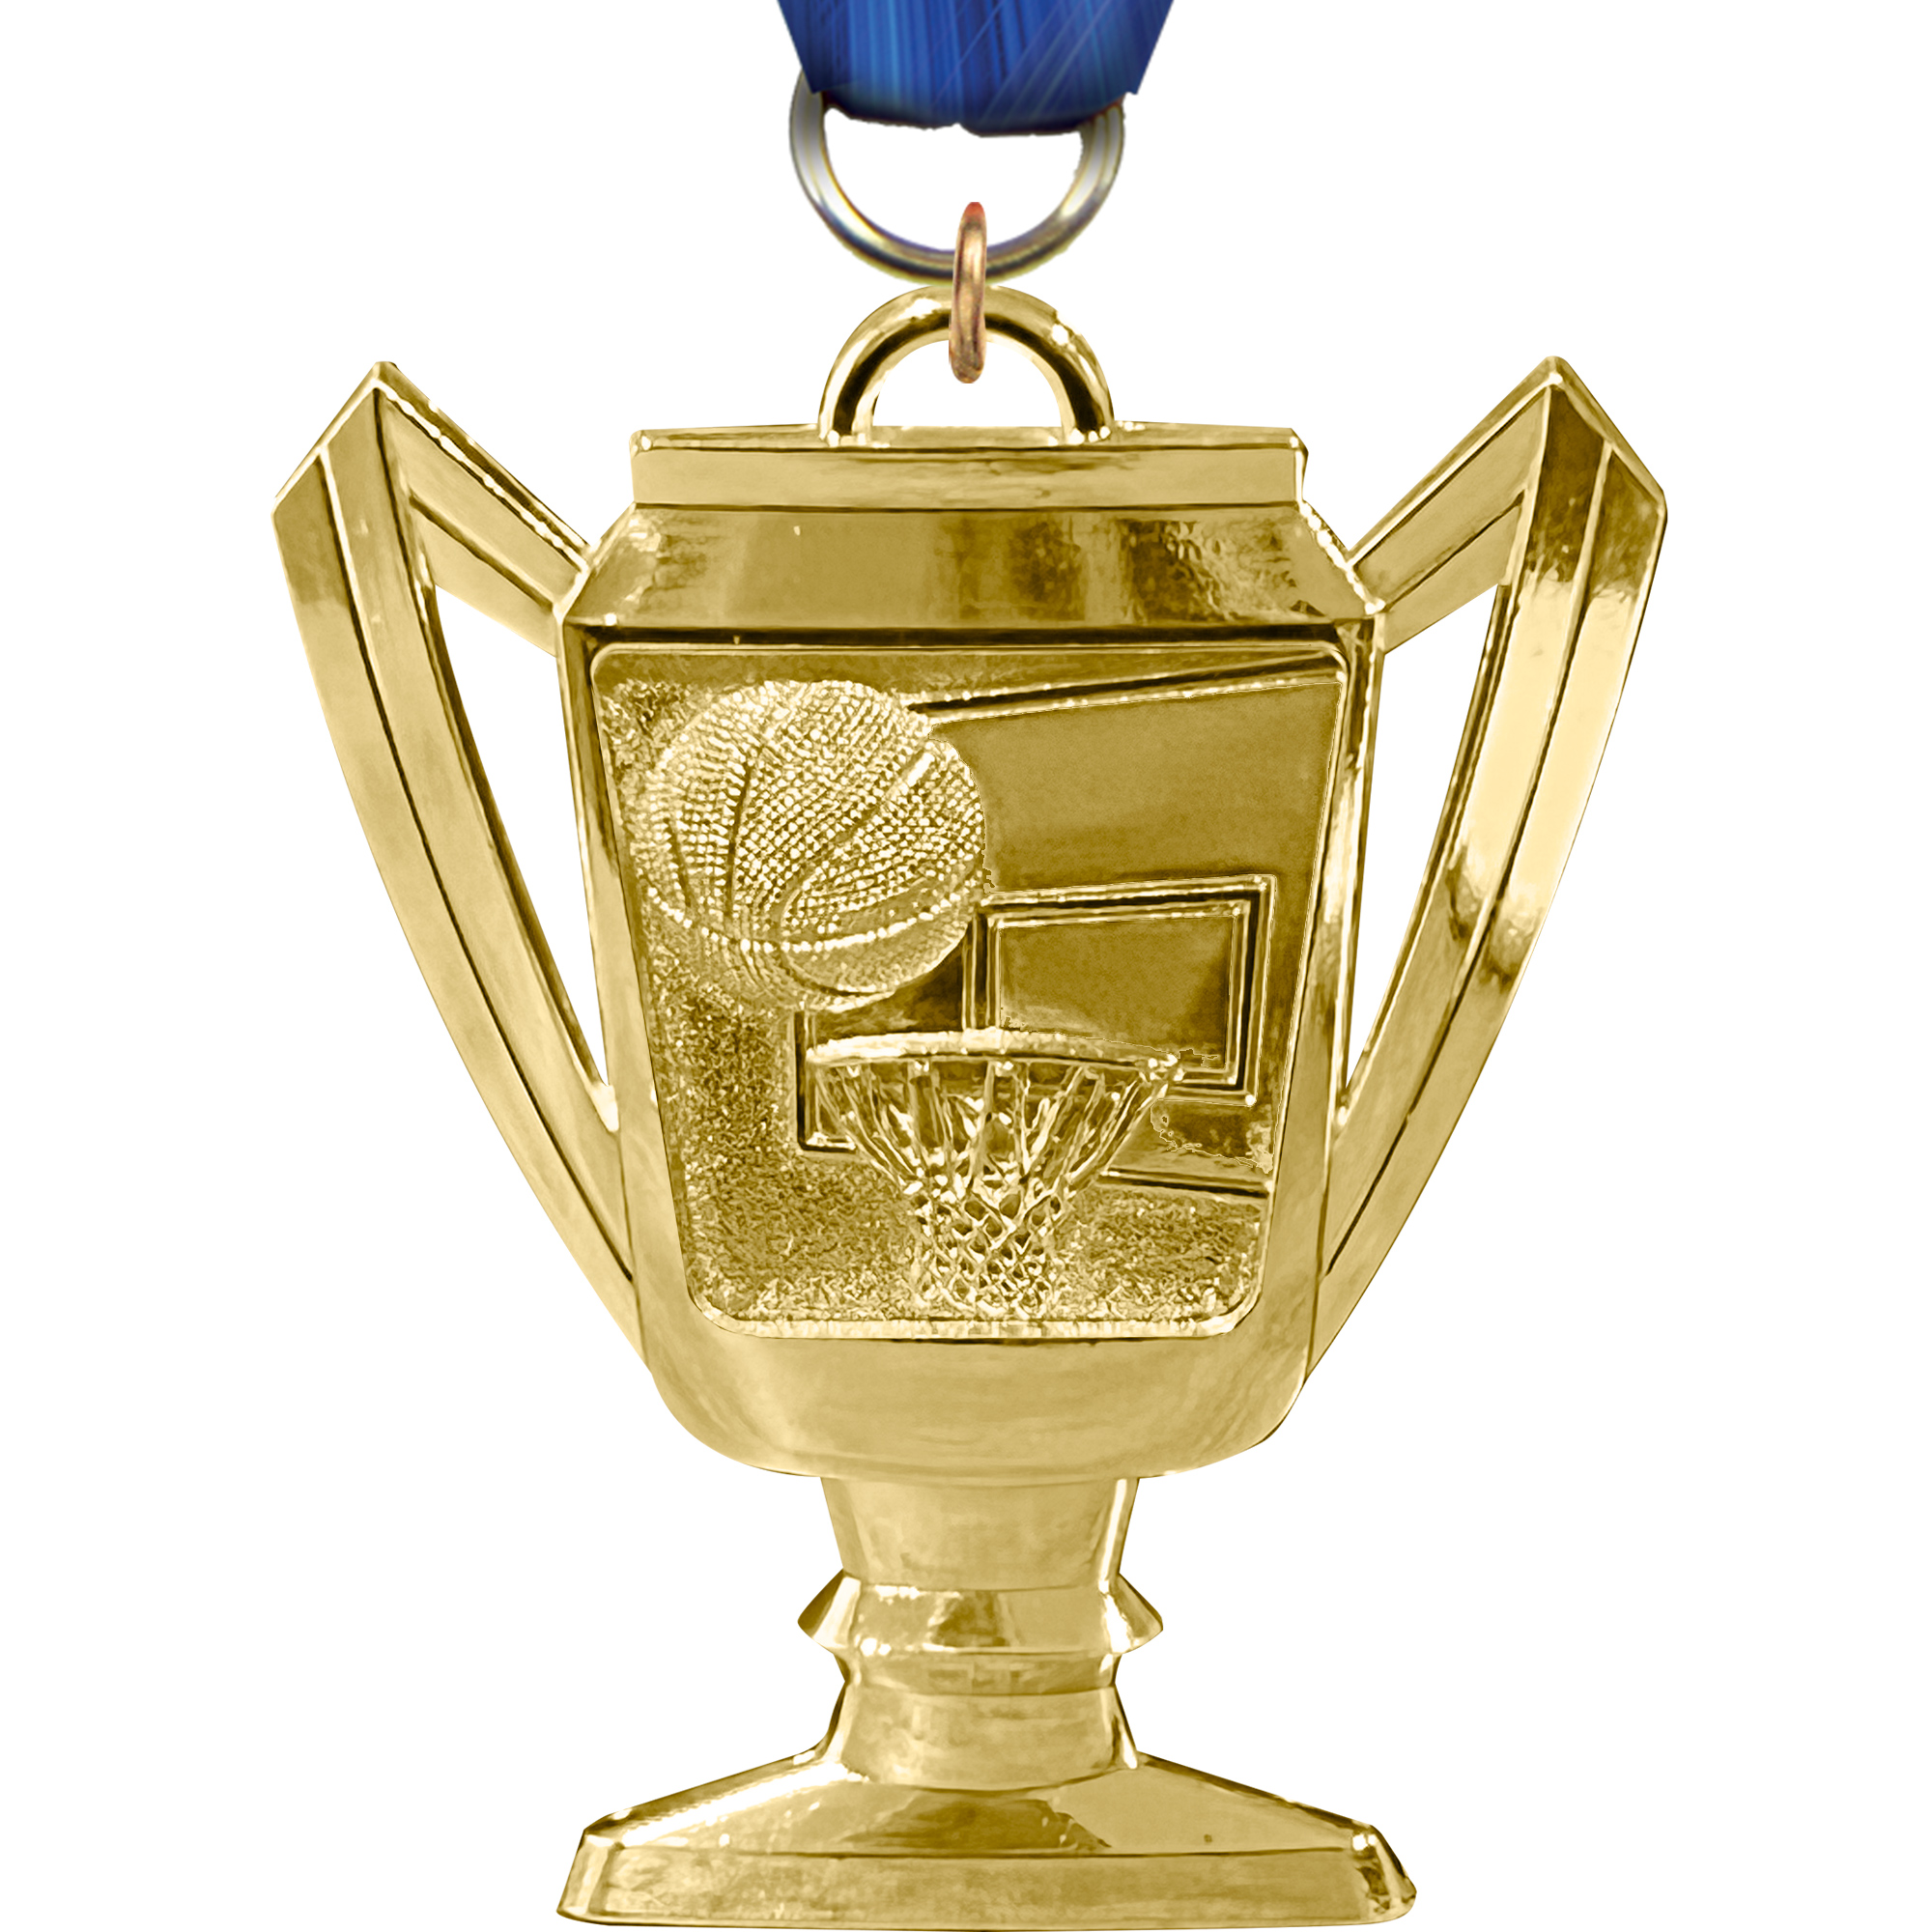 Basketball Bright Gold Trophy Cup Medal